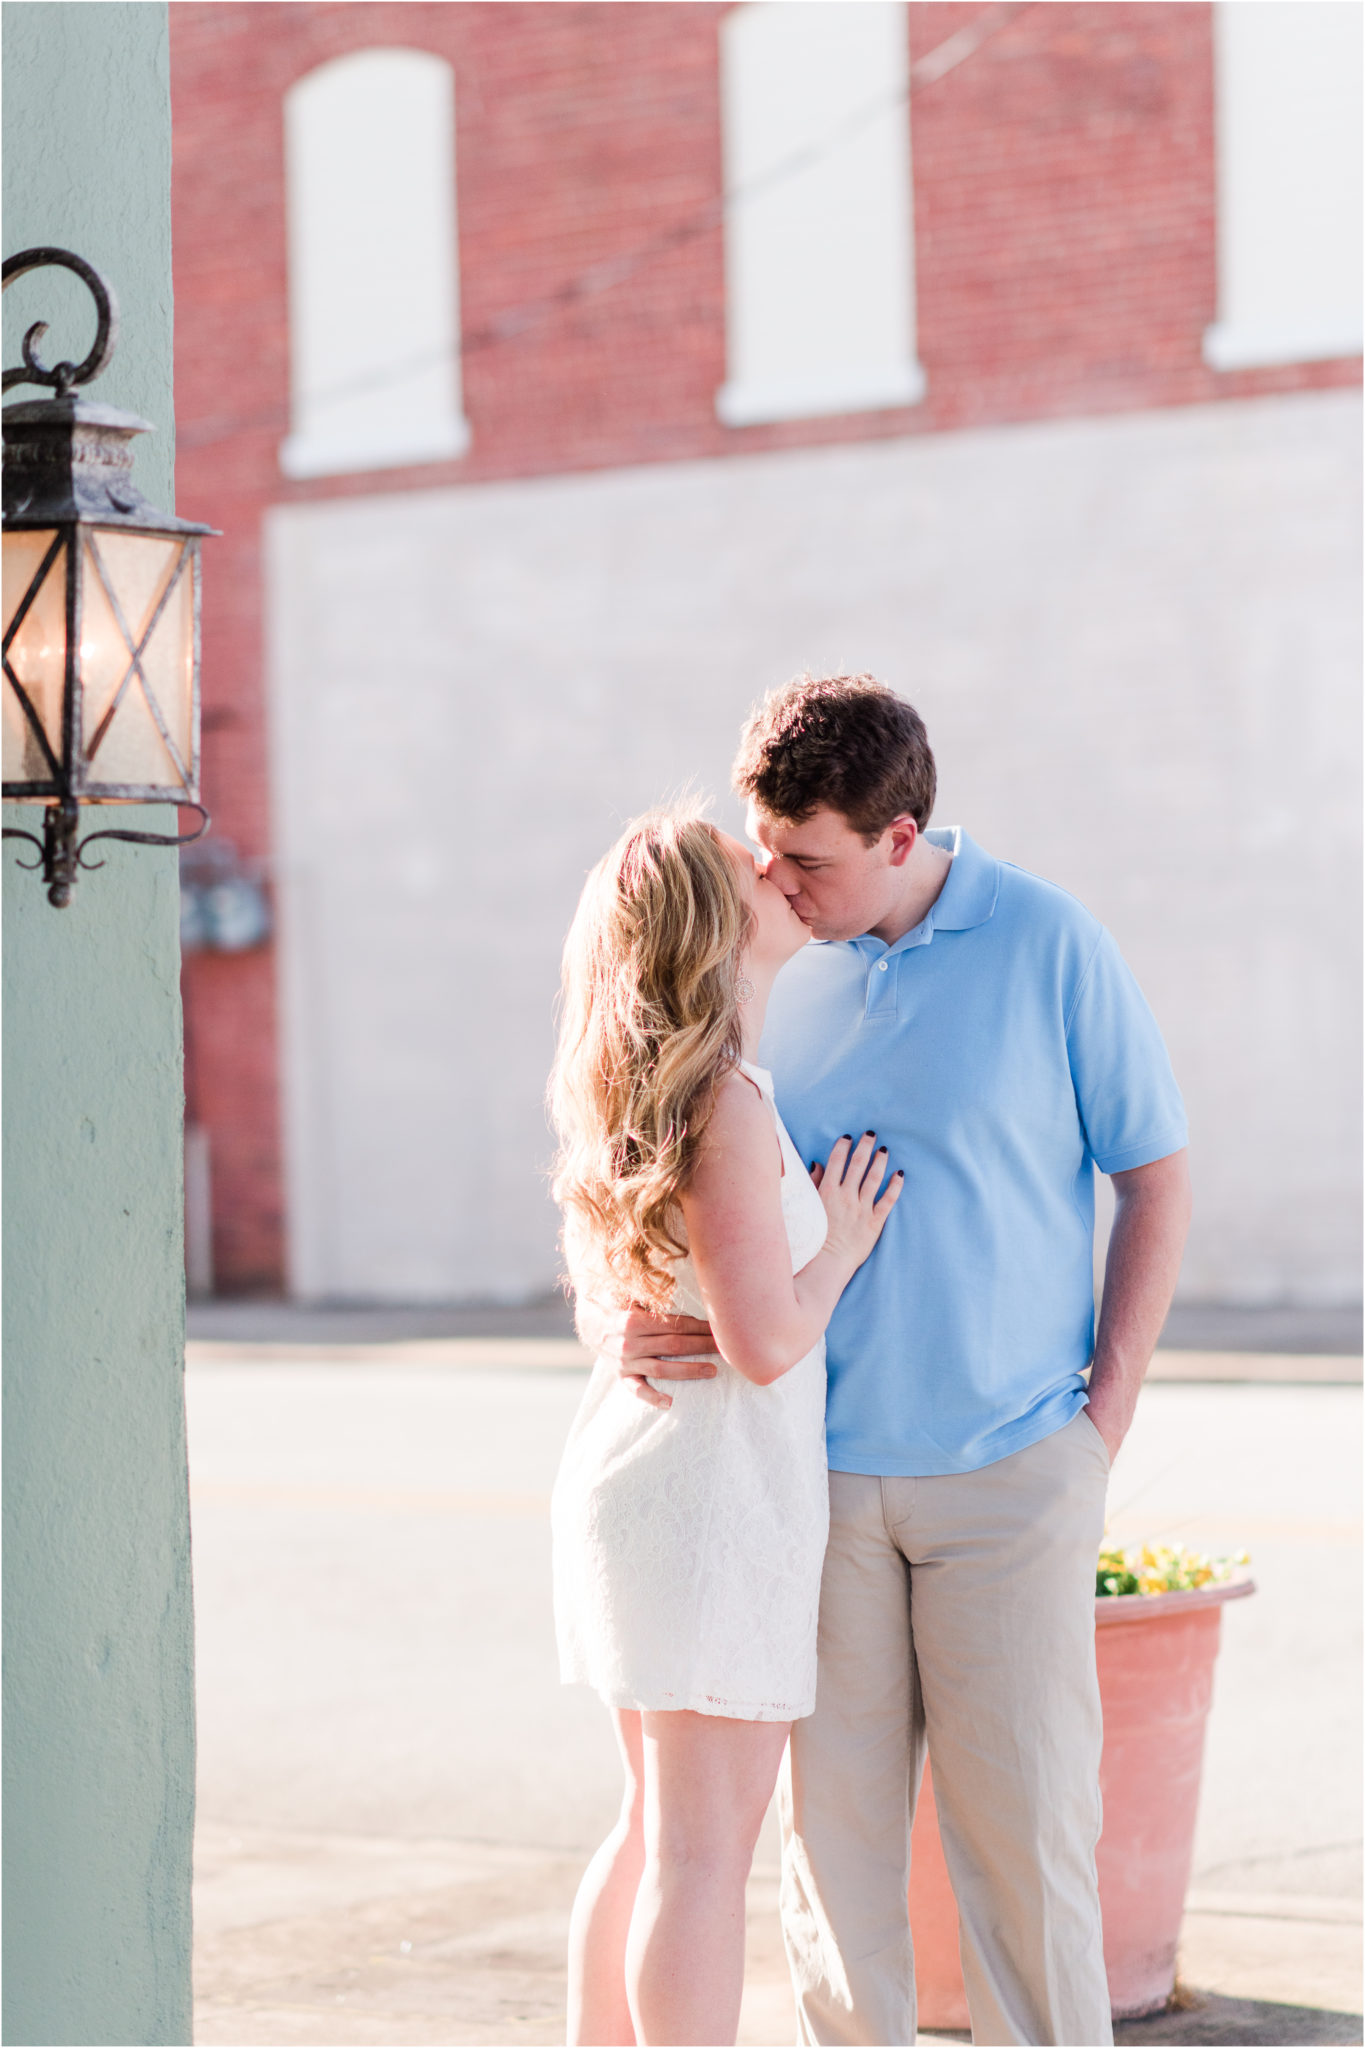 Engagement photography with mint colors